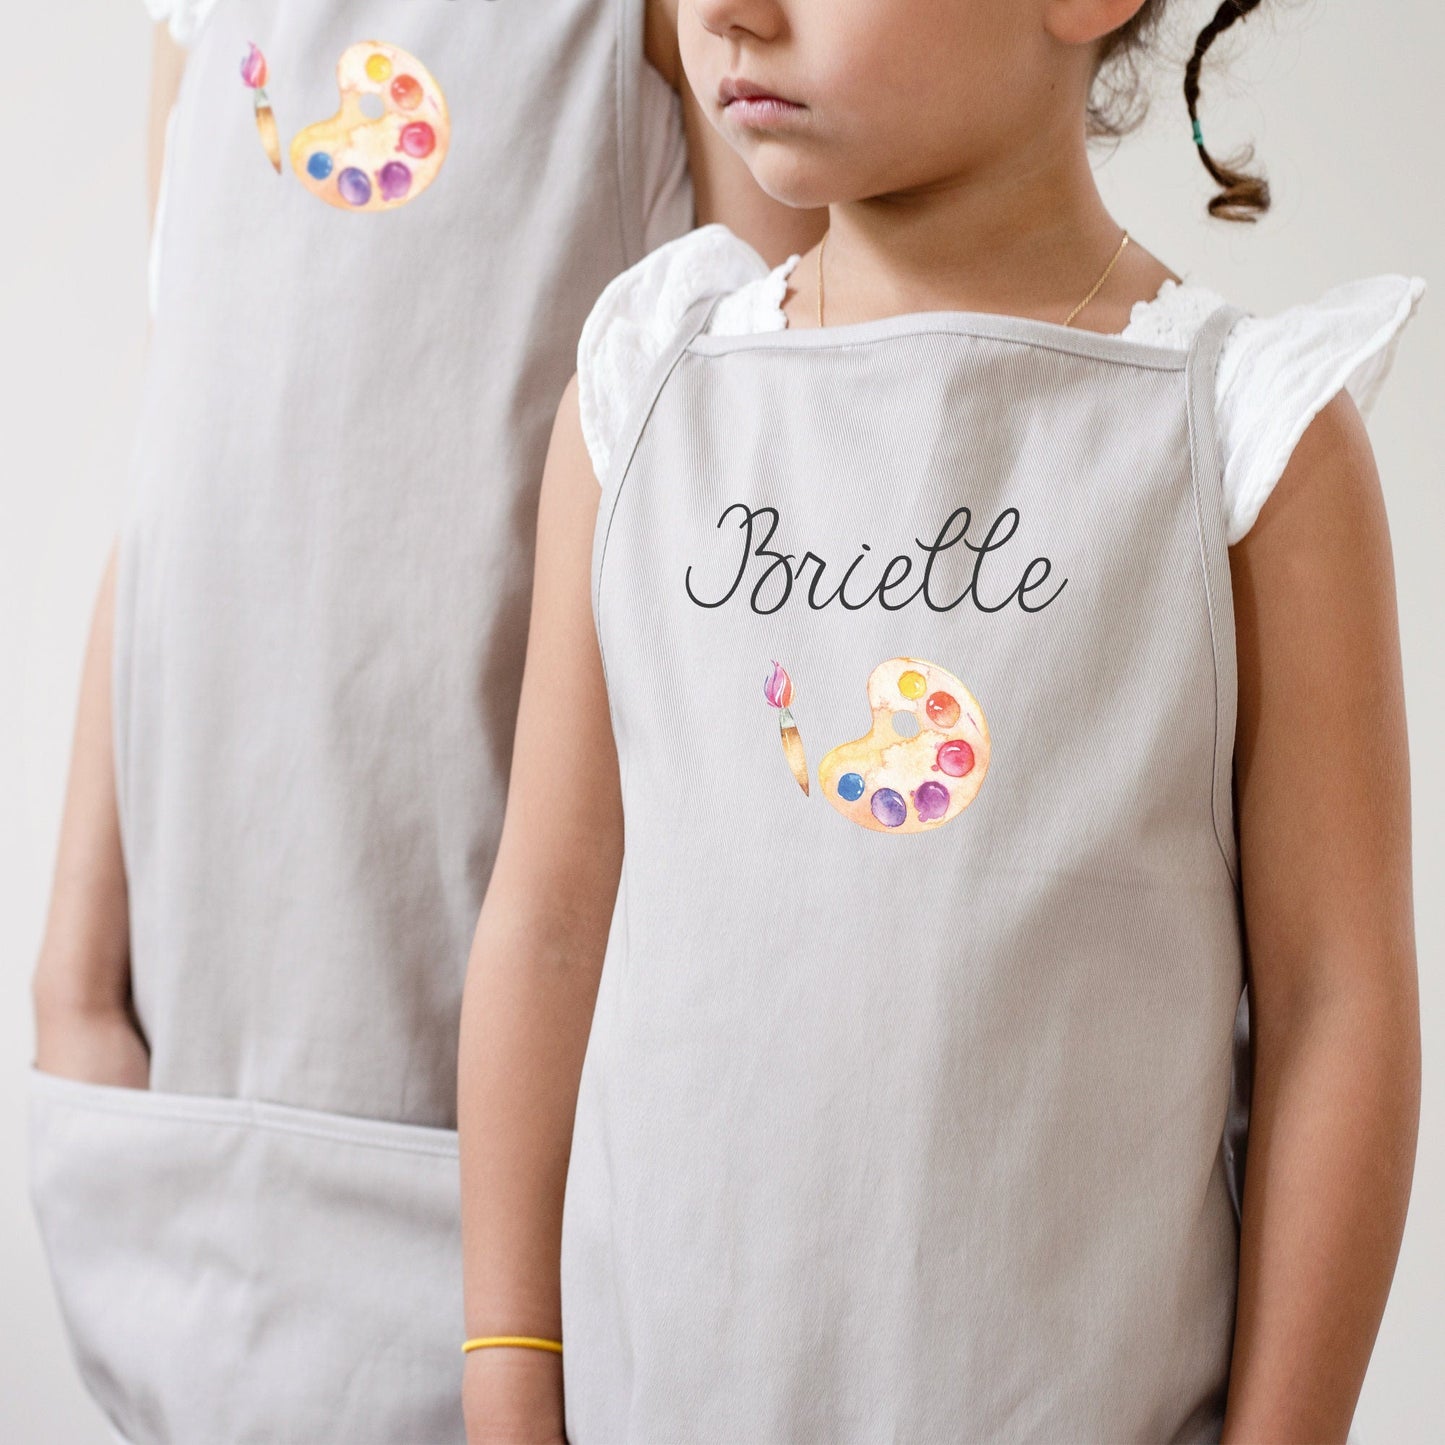 Load image into Gallery viewer, Kids Craft Apron | Youth Kids Apron | Child Apron | Full Craft Kids Apron | Kid Craft Apron | Kid Apron | Personalized Name Apron for Kids
